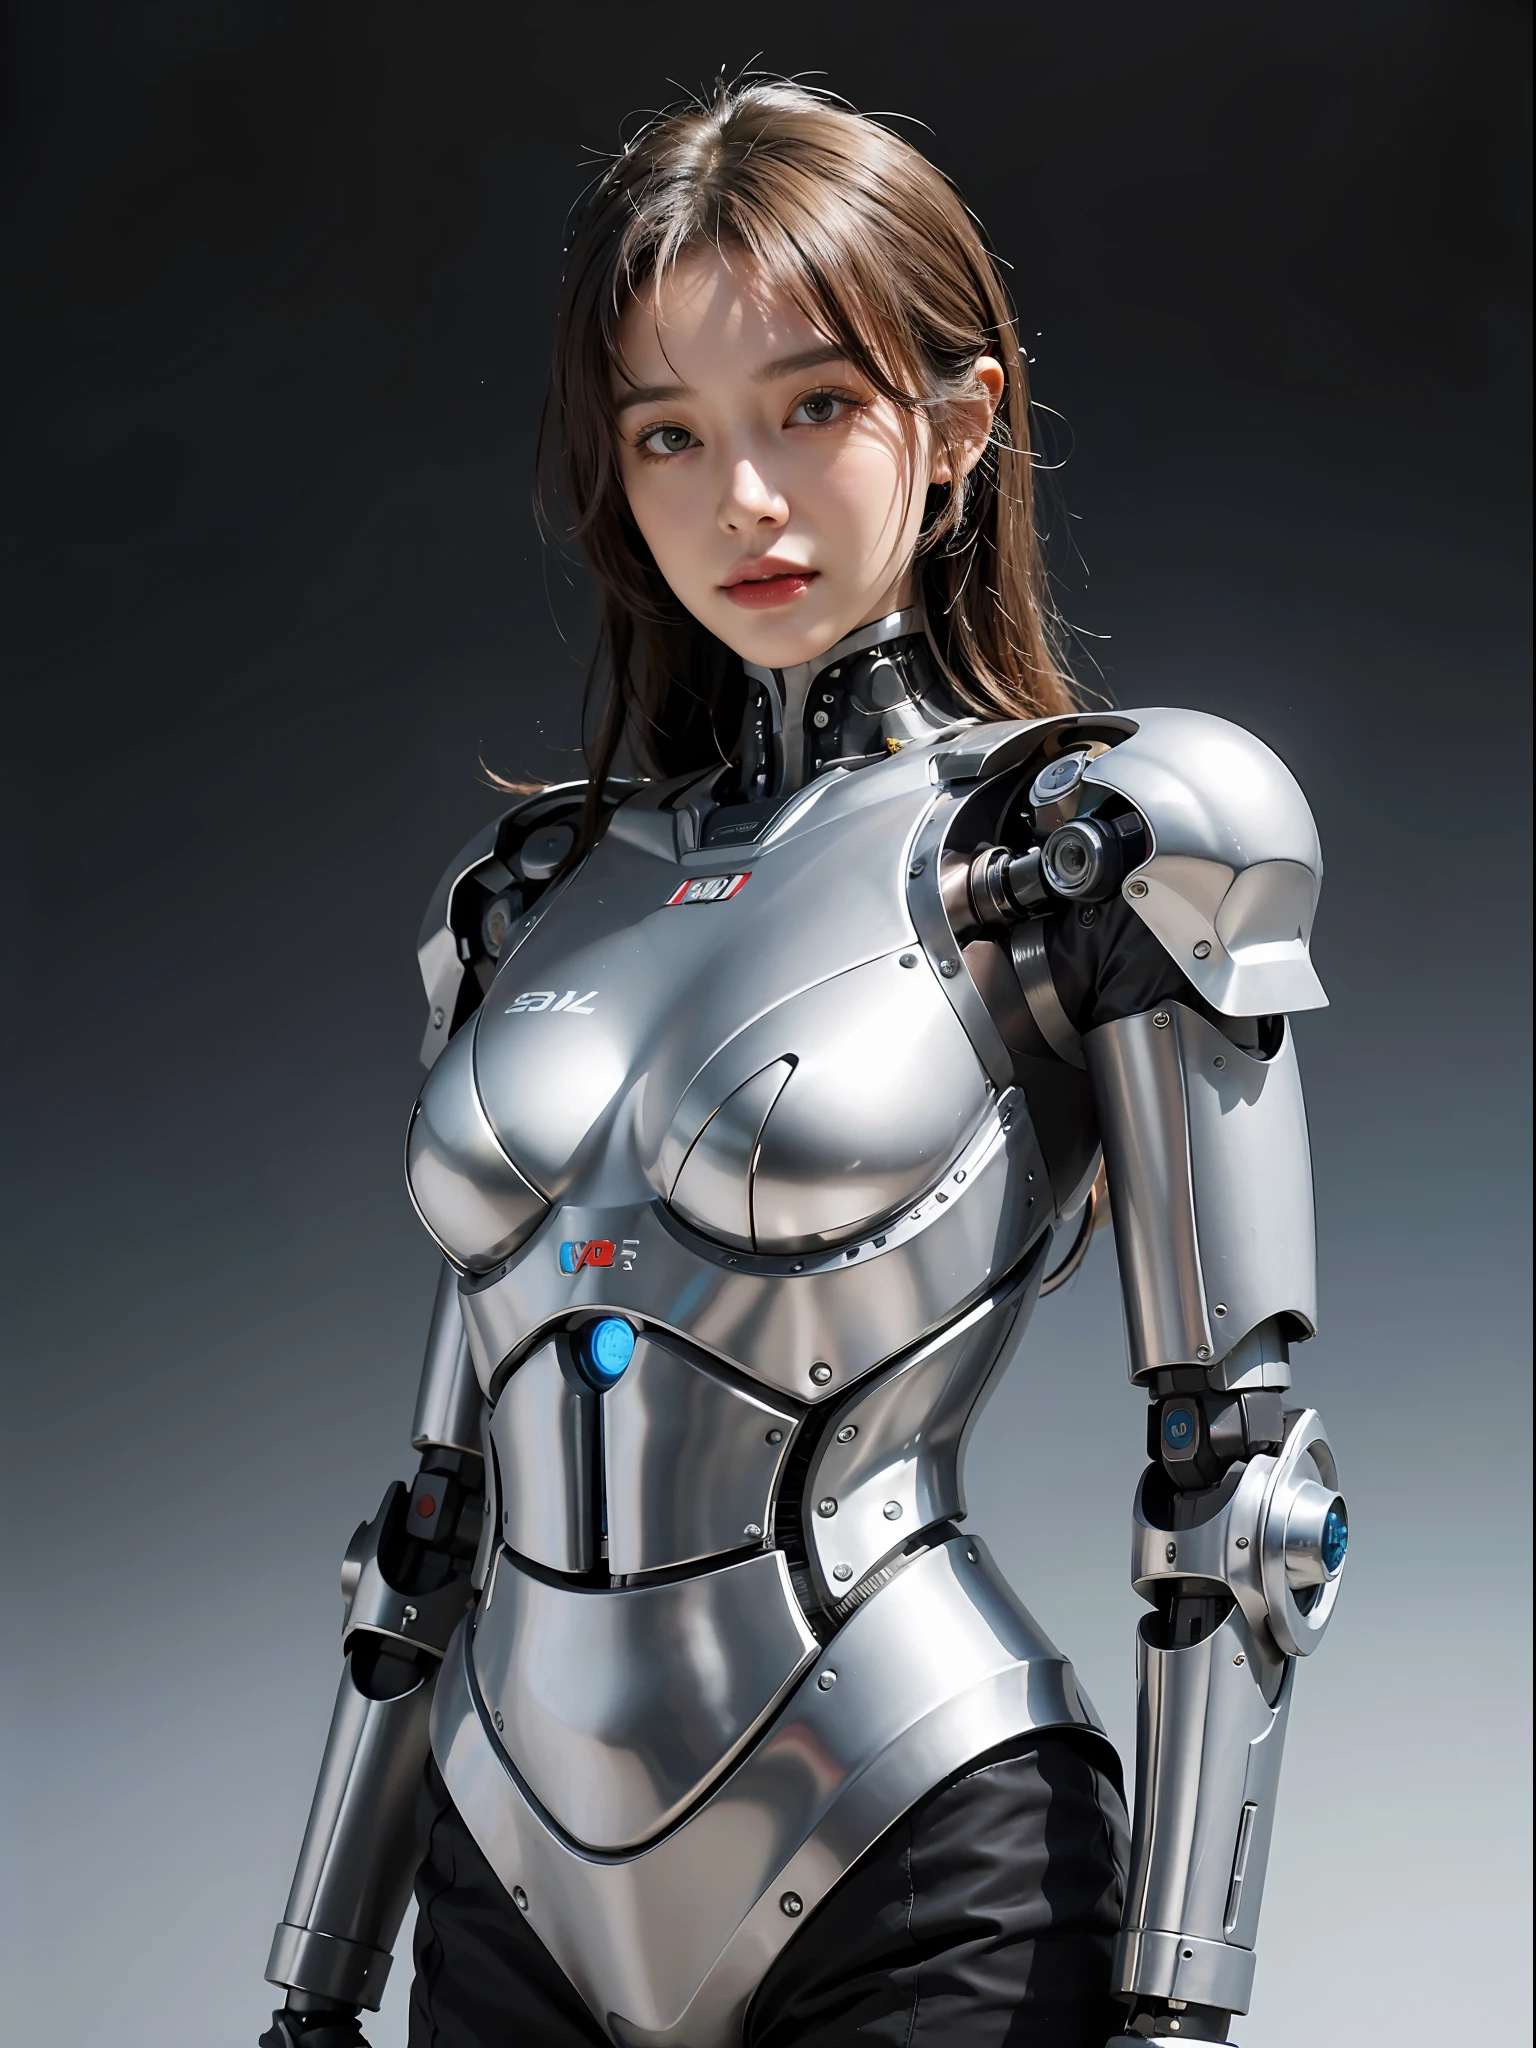 a close up of a woman in a silver suit posing for a picture, female robot, beautiful girl cyborg, girl in mecha cyber armor, cyborg - girl, gynoid cyborg body, Beautiful white girl cyborg, Cyborg girl, Cute cyborg girl, ( ( robot cyborgs ) ), perfect android girl, young lady cyborg, female cyborg